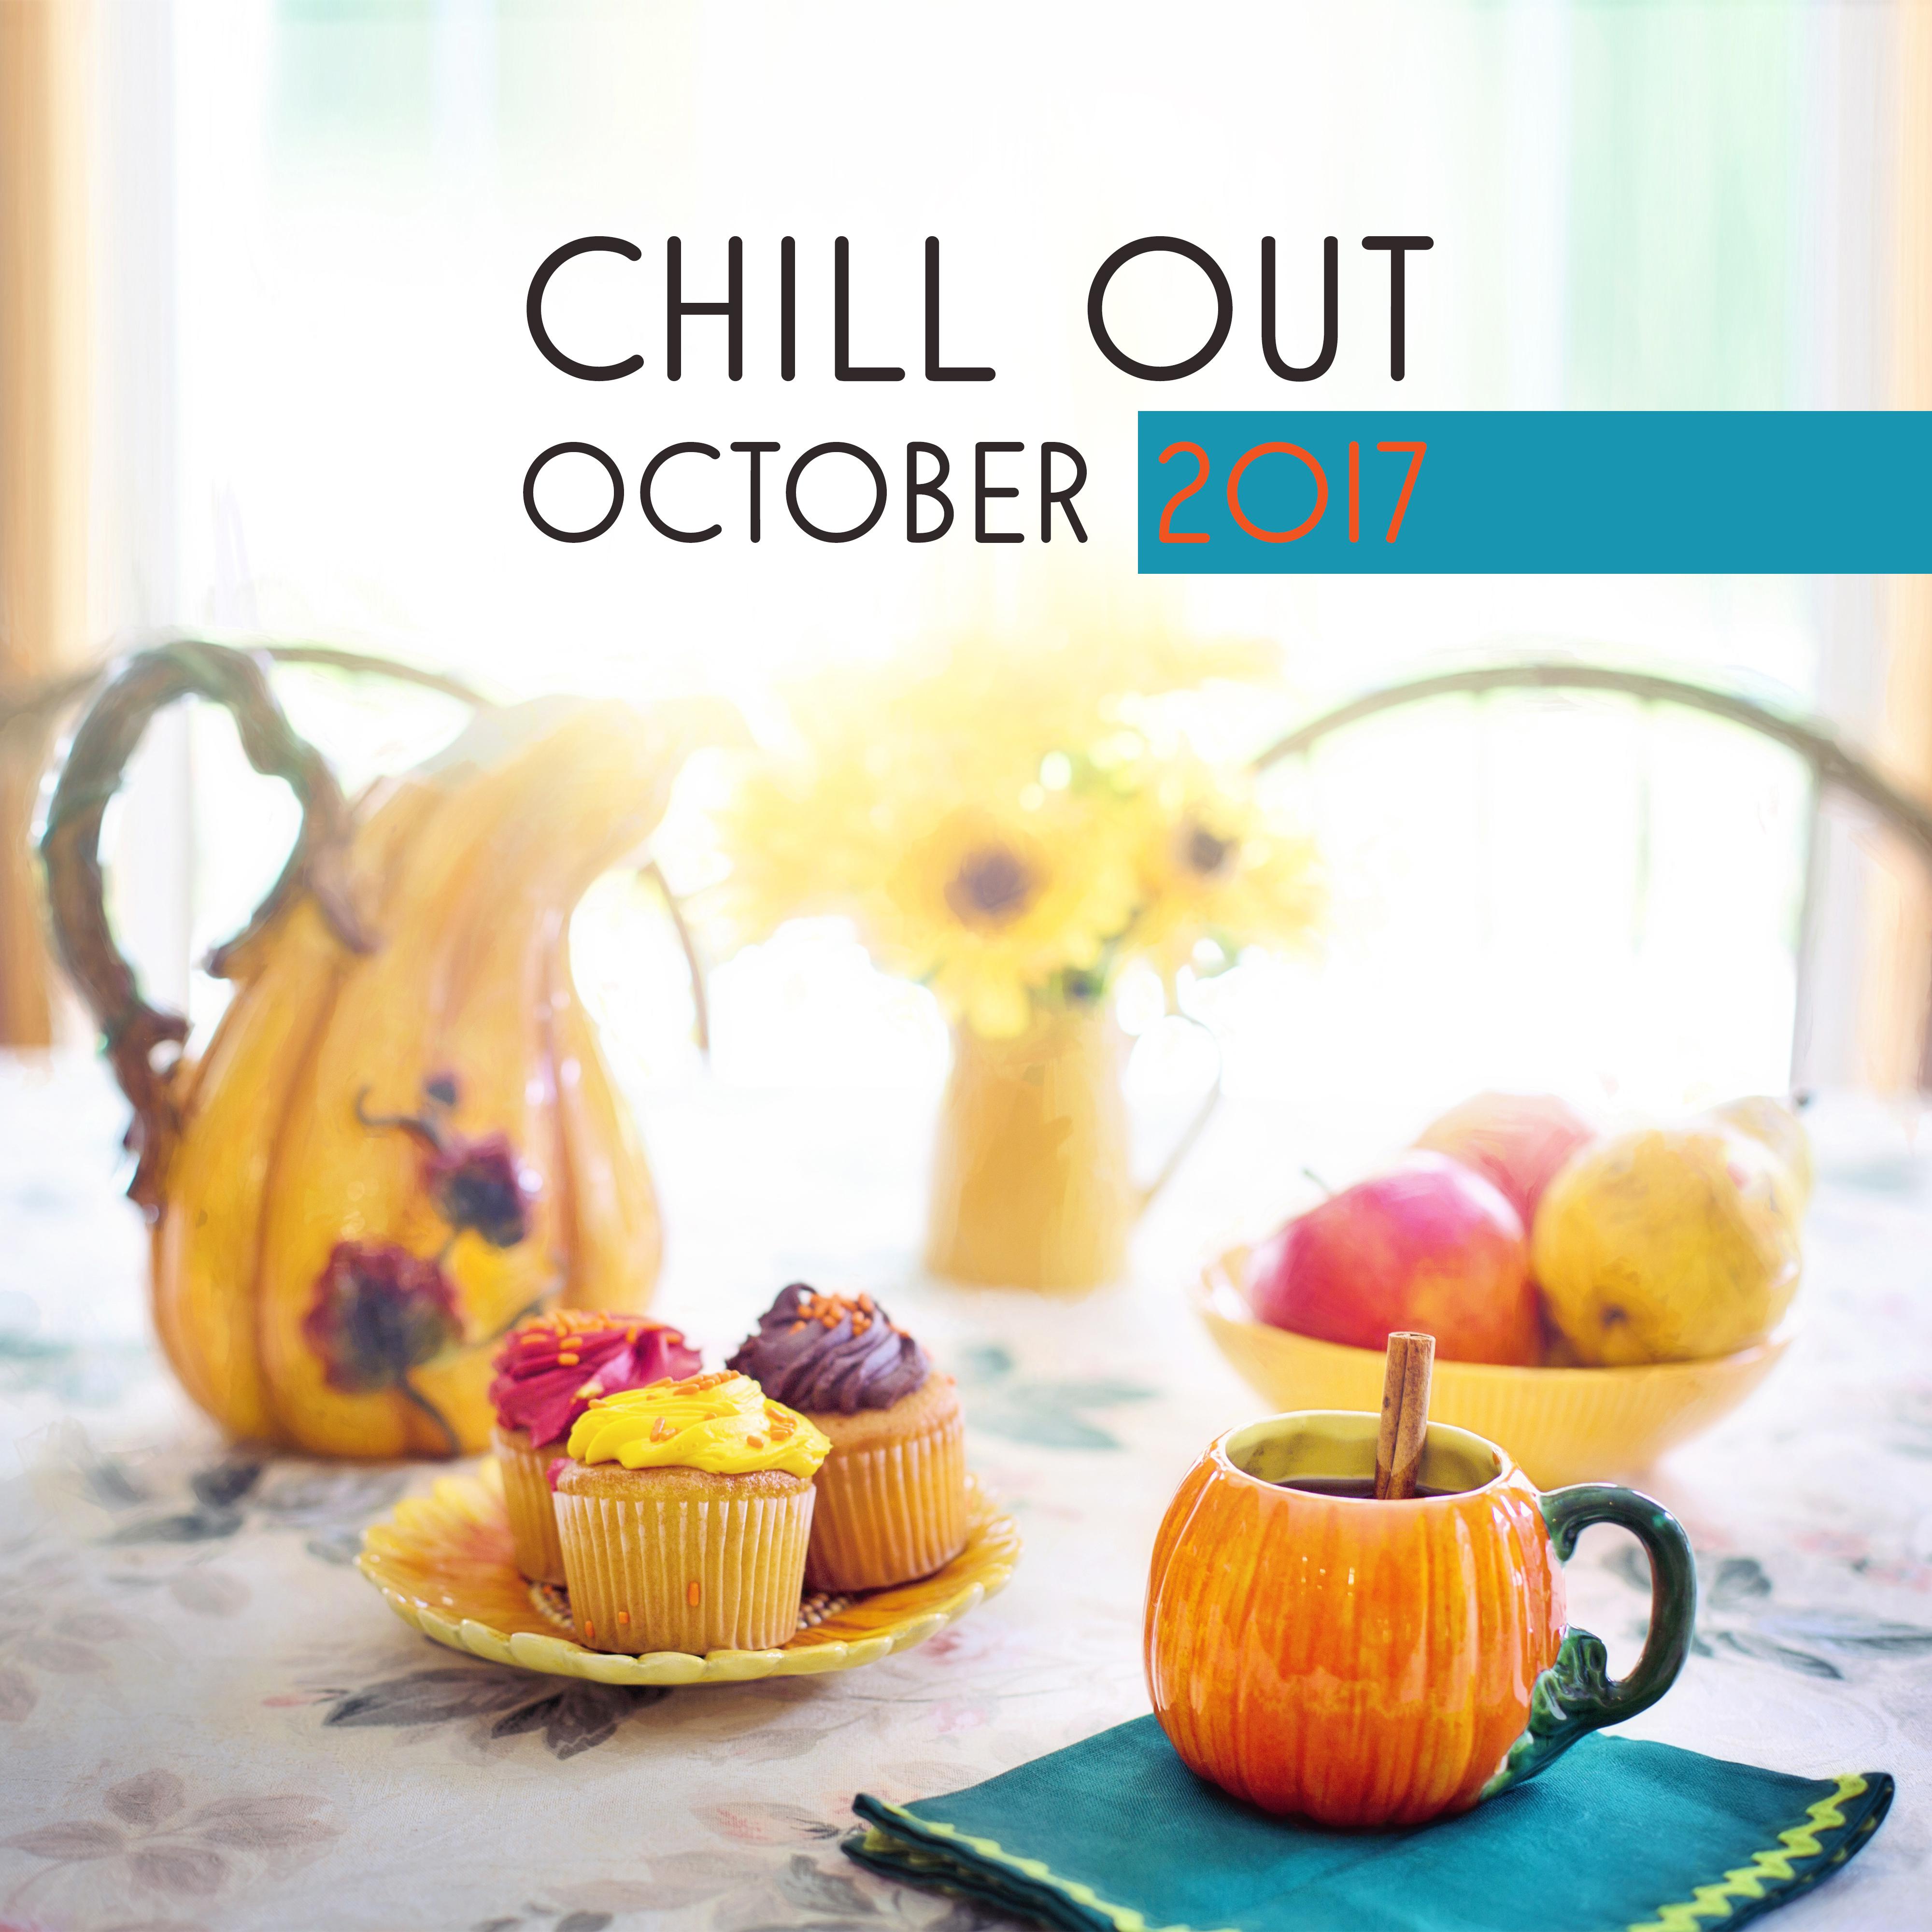 Chill Out October 2017 – The Best of Chill Out 2017, Ambient, Lounge, Ibiza Club, Relax, Party Music, Dance